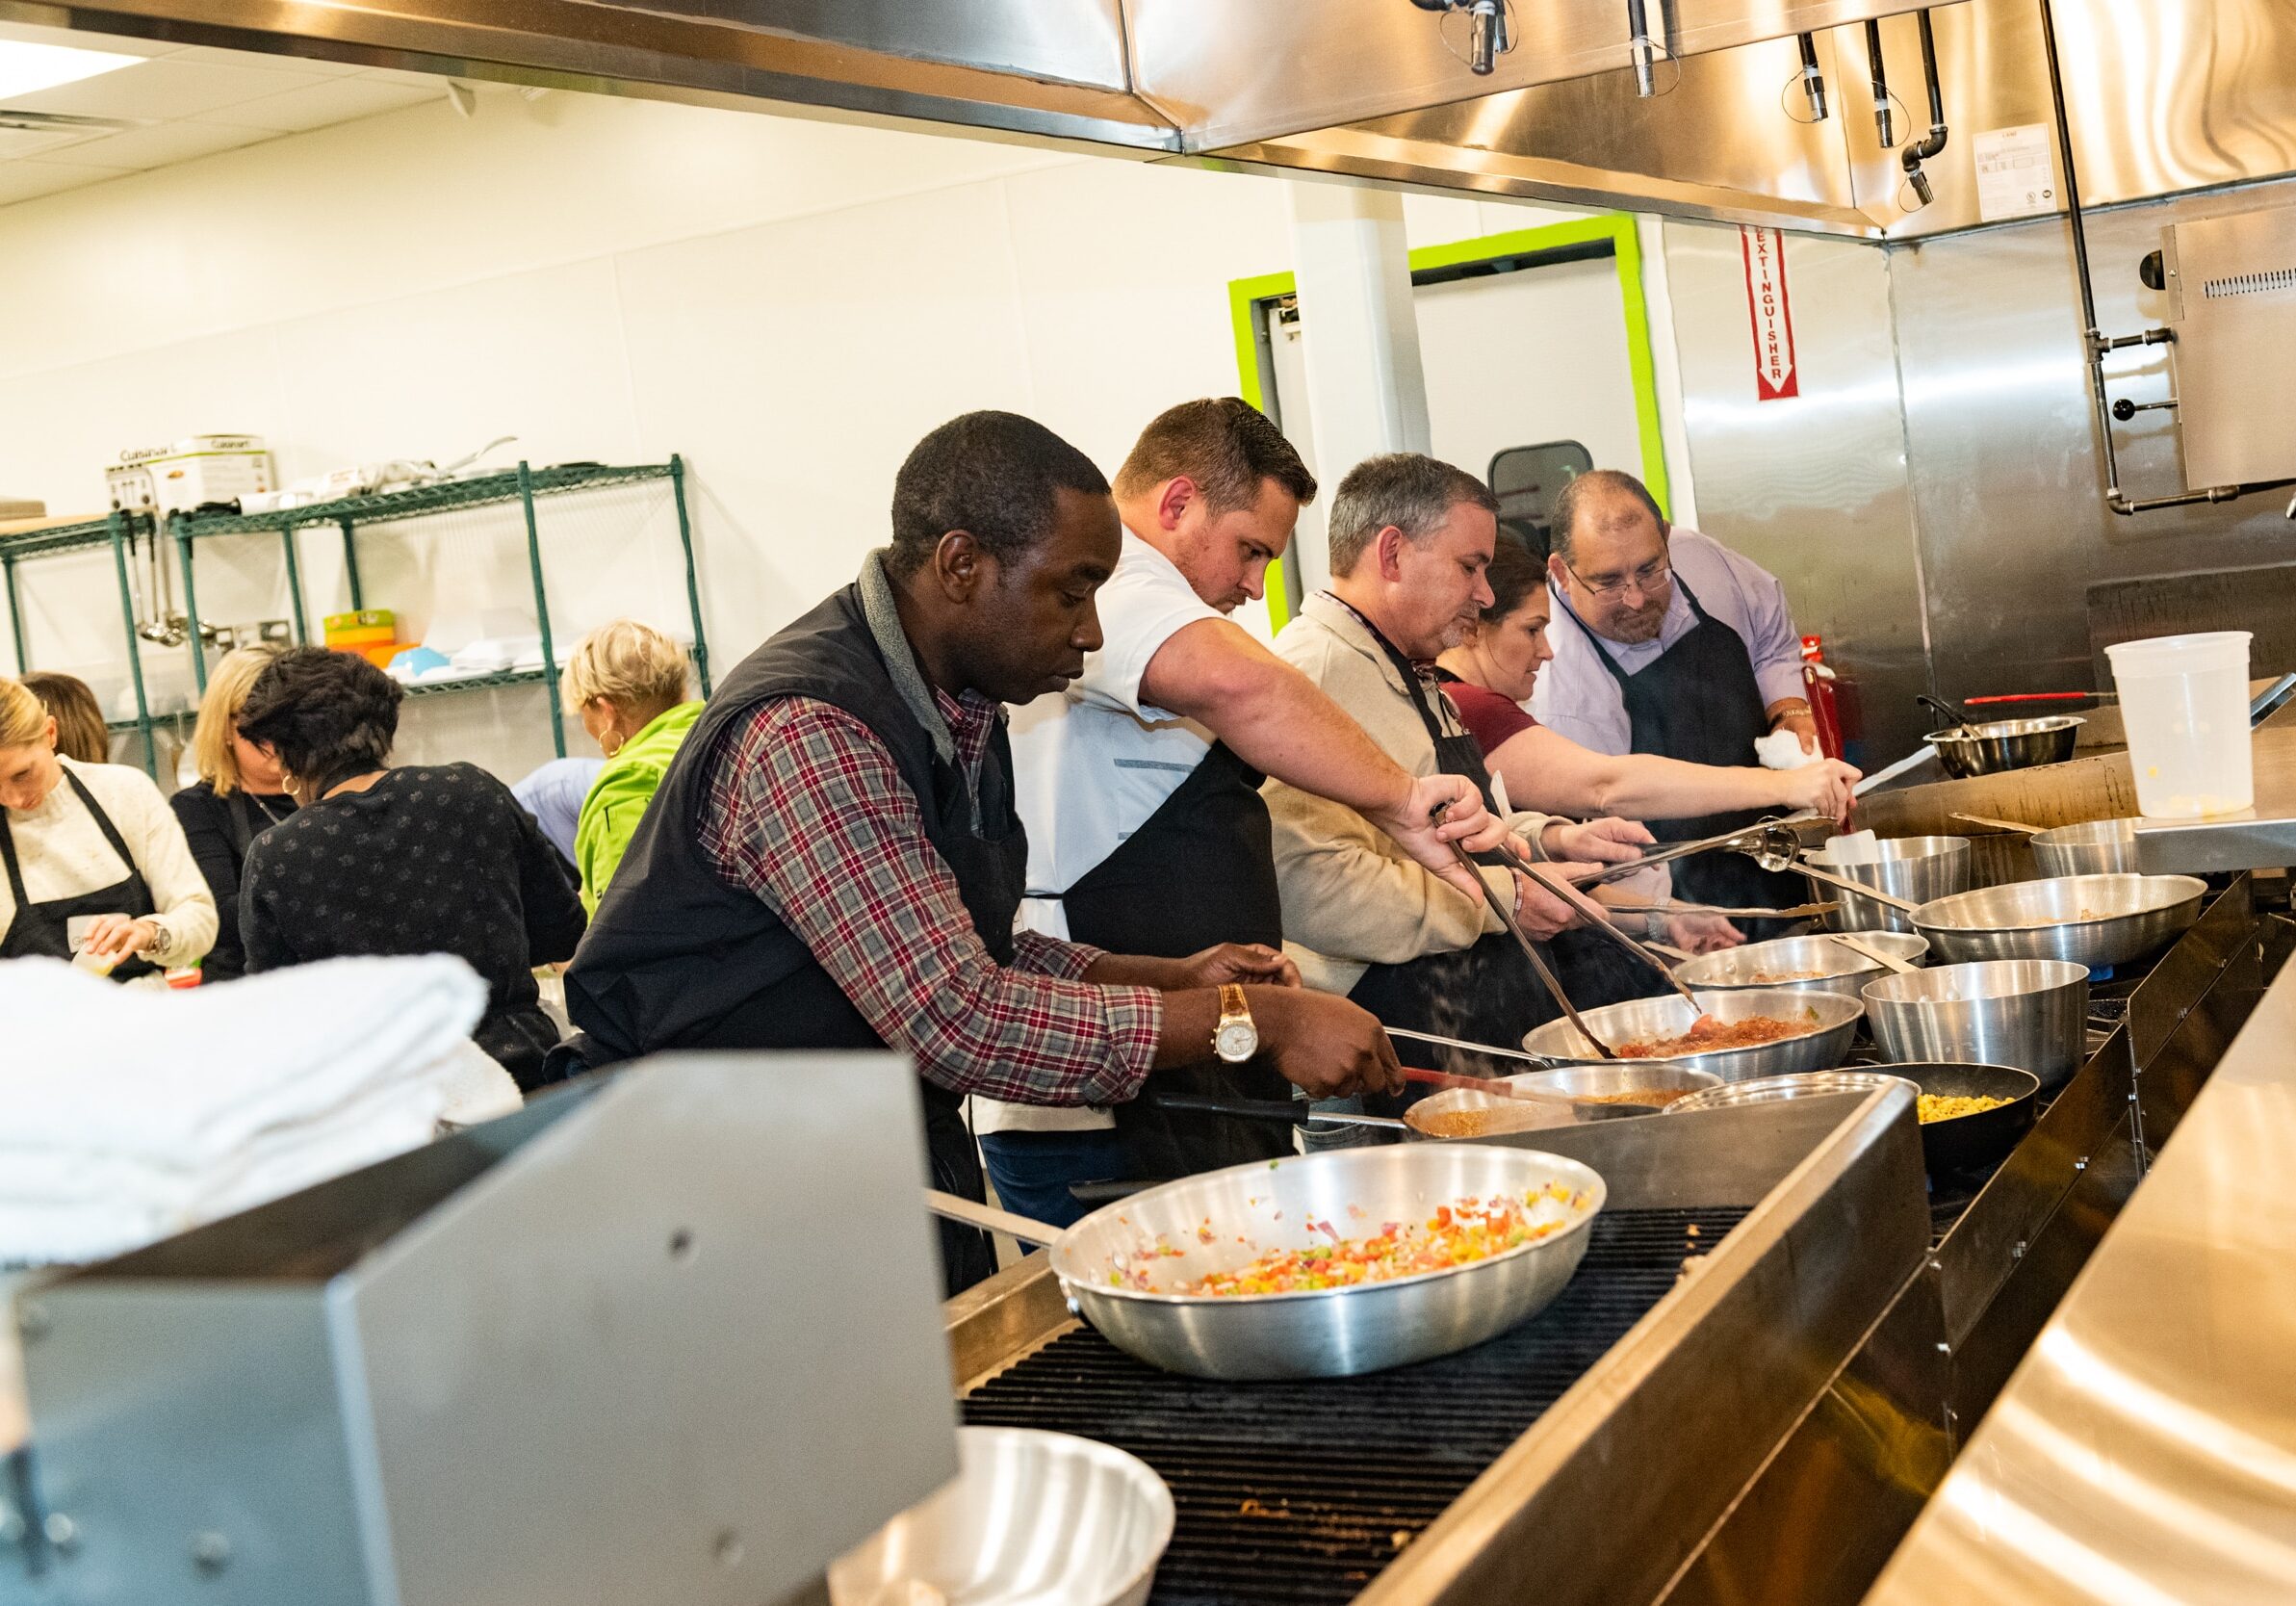 A Corporate Team Building event in our kitchen is designed to build familiarity, trust and collaboration among participants.